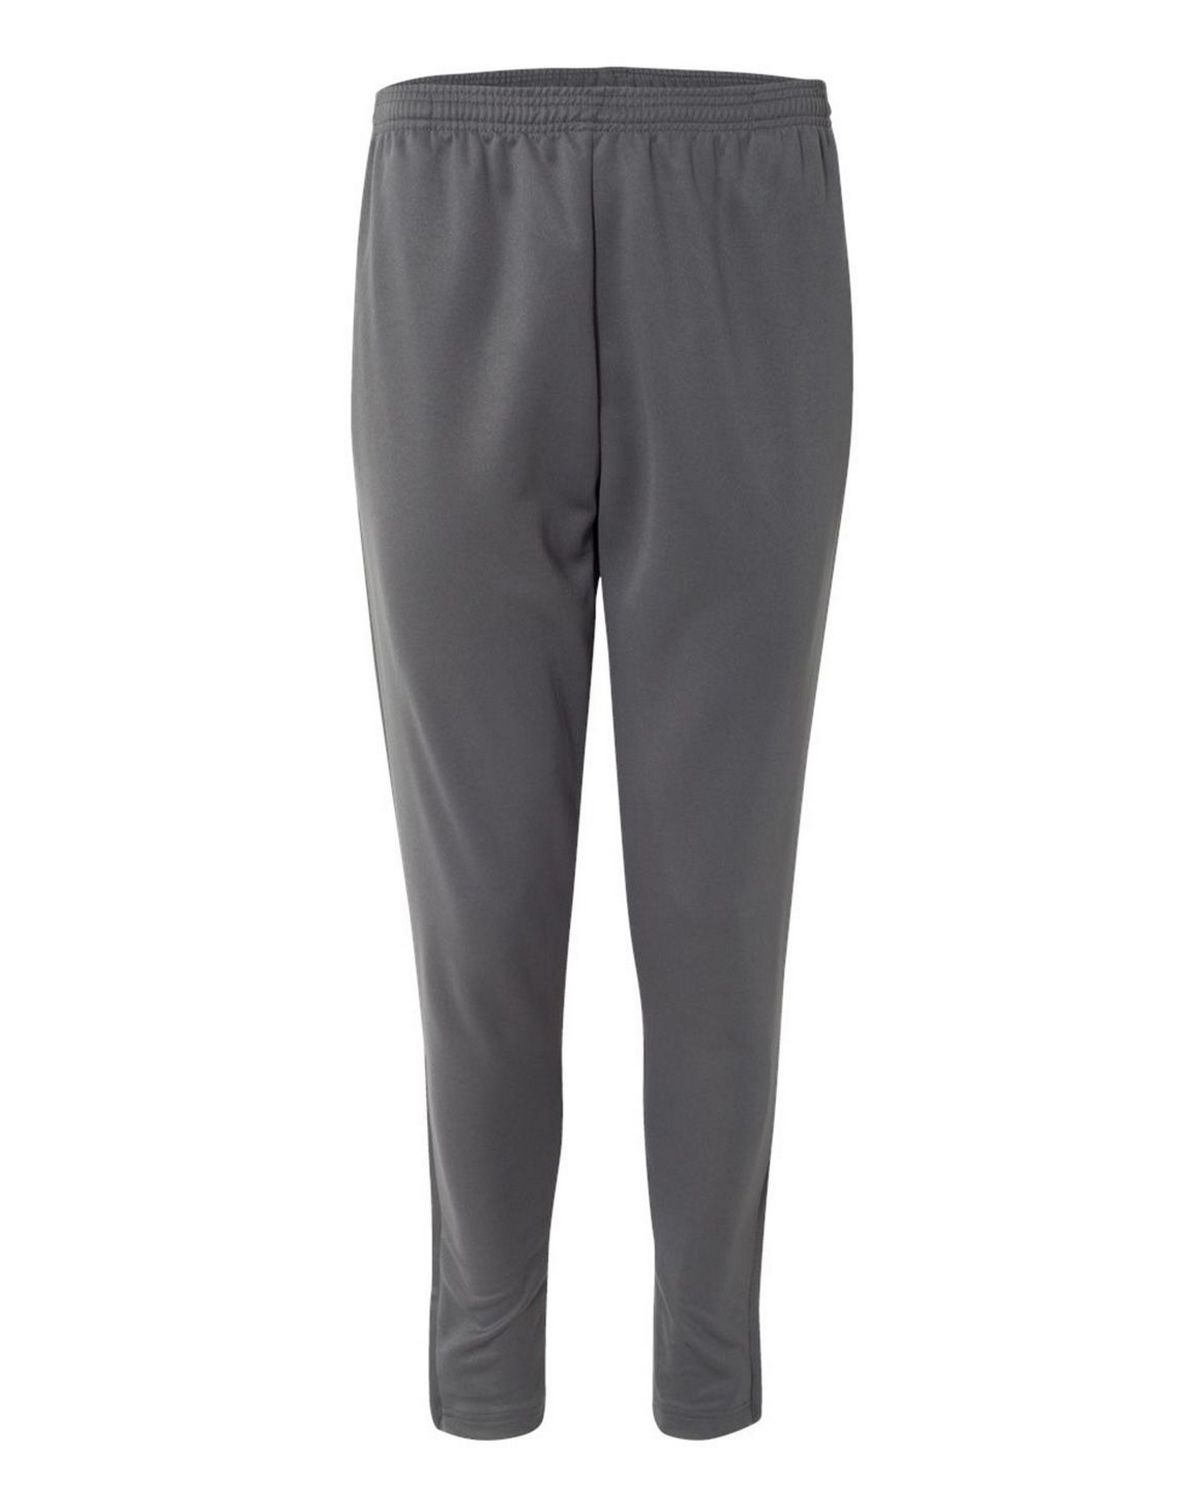 Badger 1575 Unbrushed Poly Trainer Pants - Shop at ApparelnBags.com